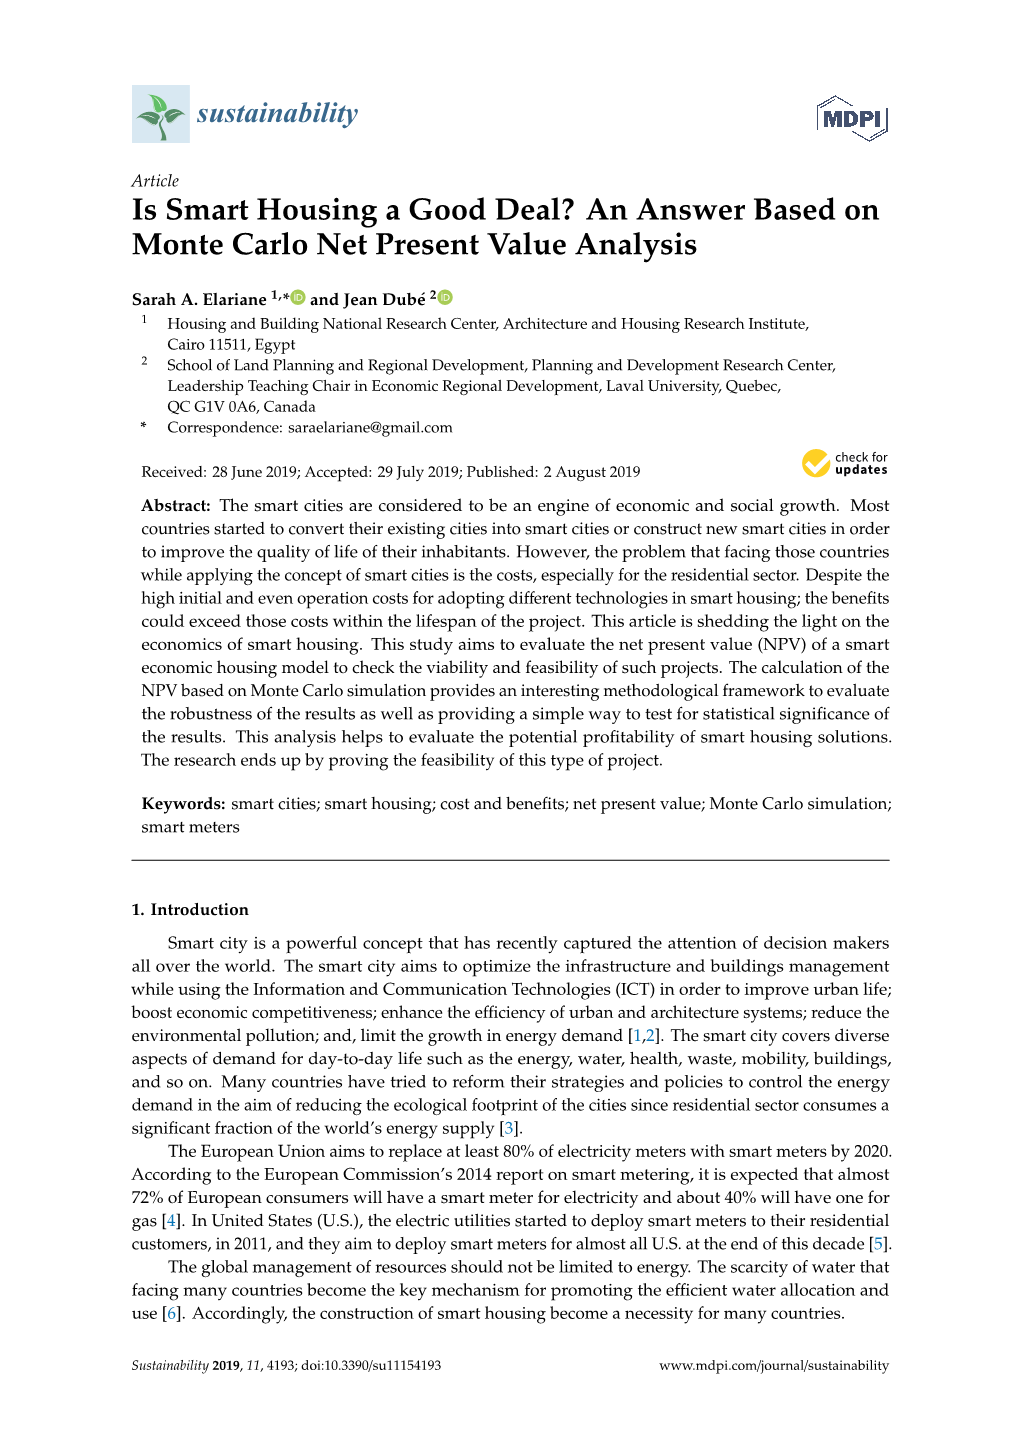 An Answer Based on Monte Carlo Net Present Value Analysis